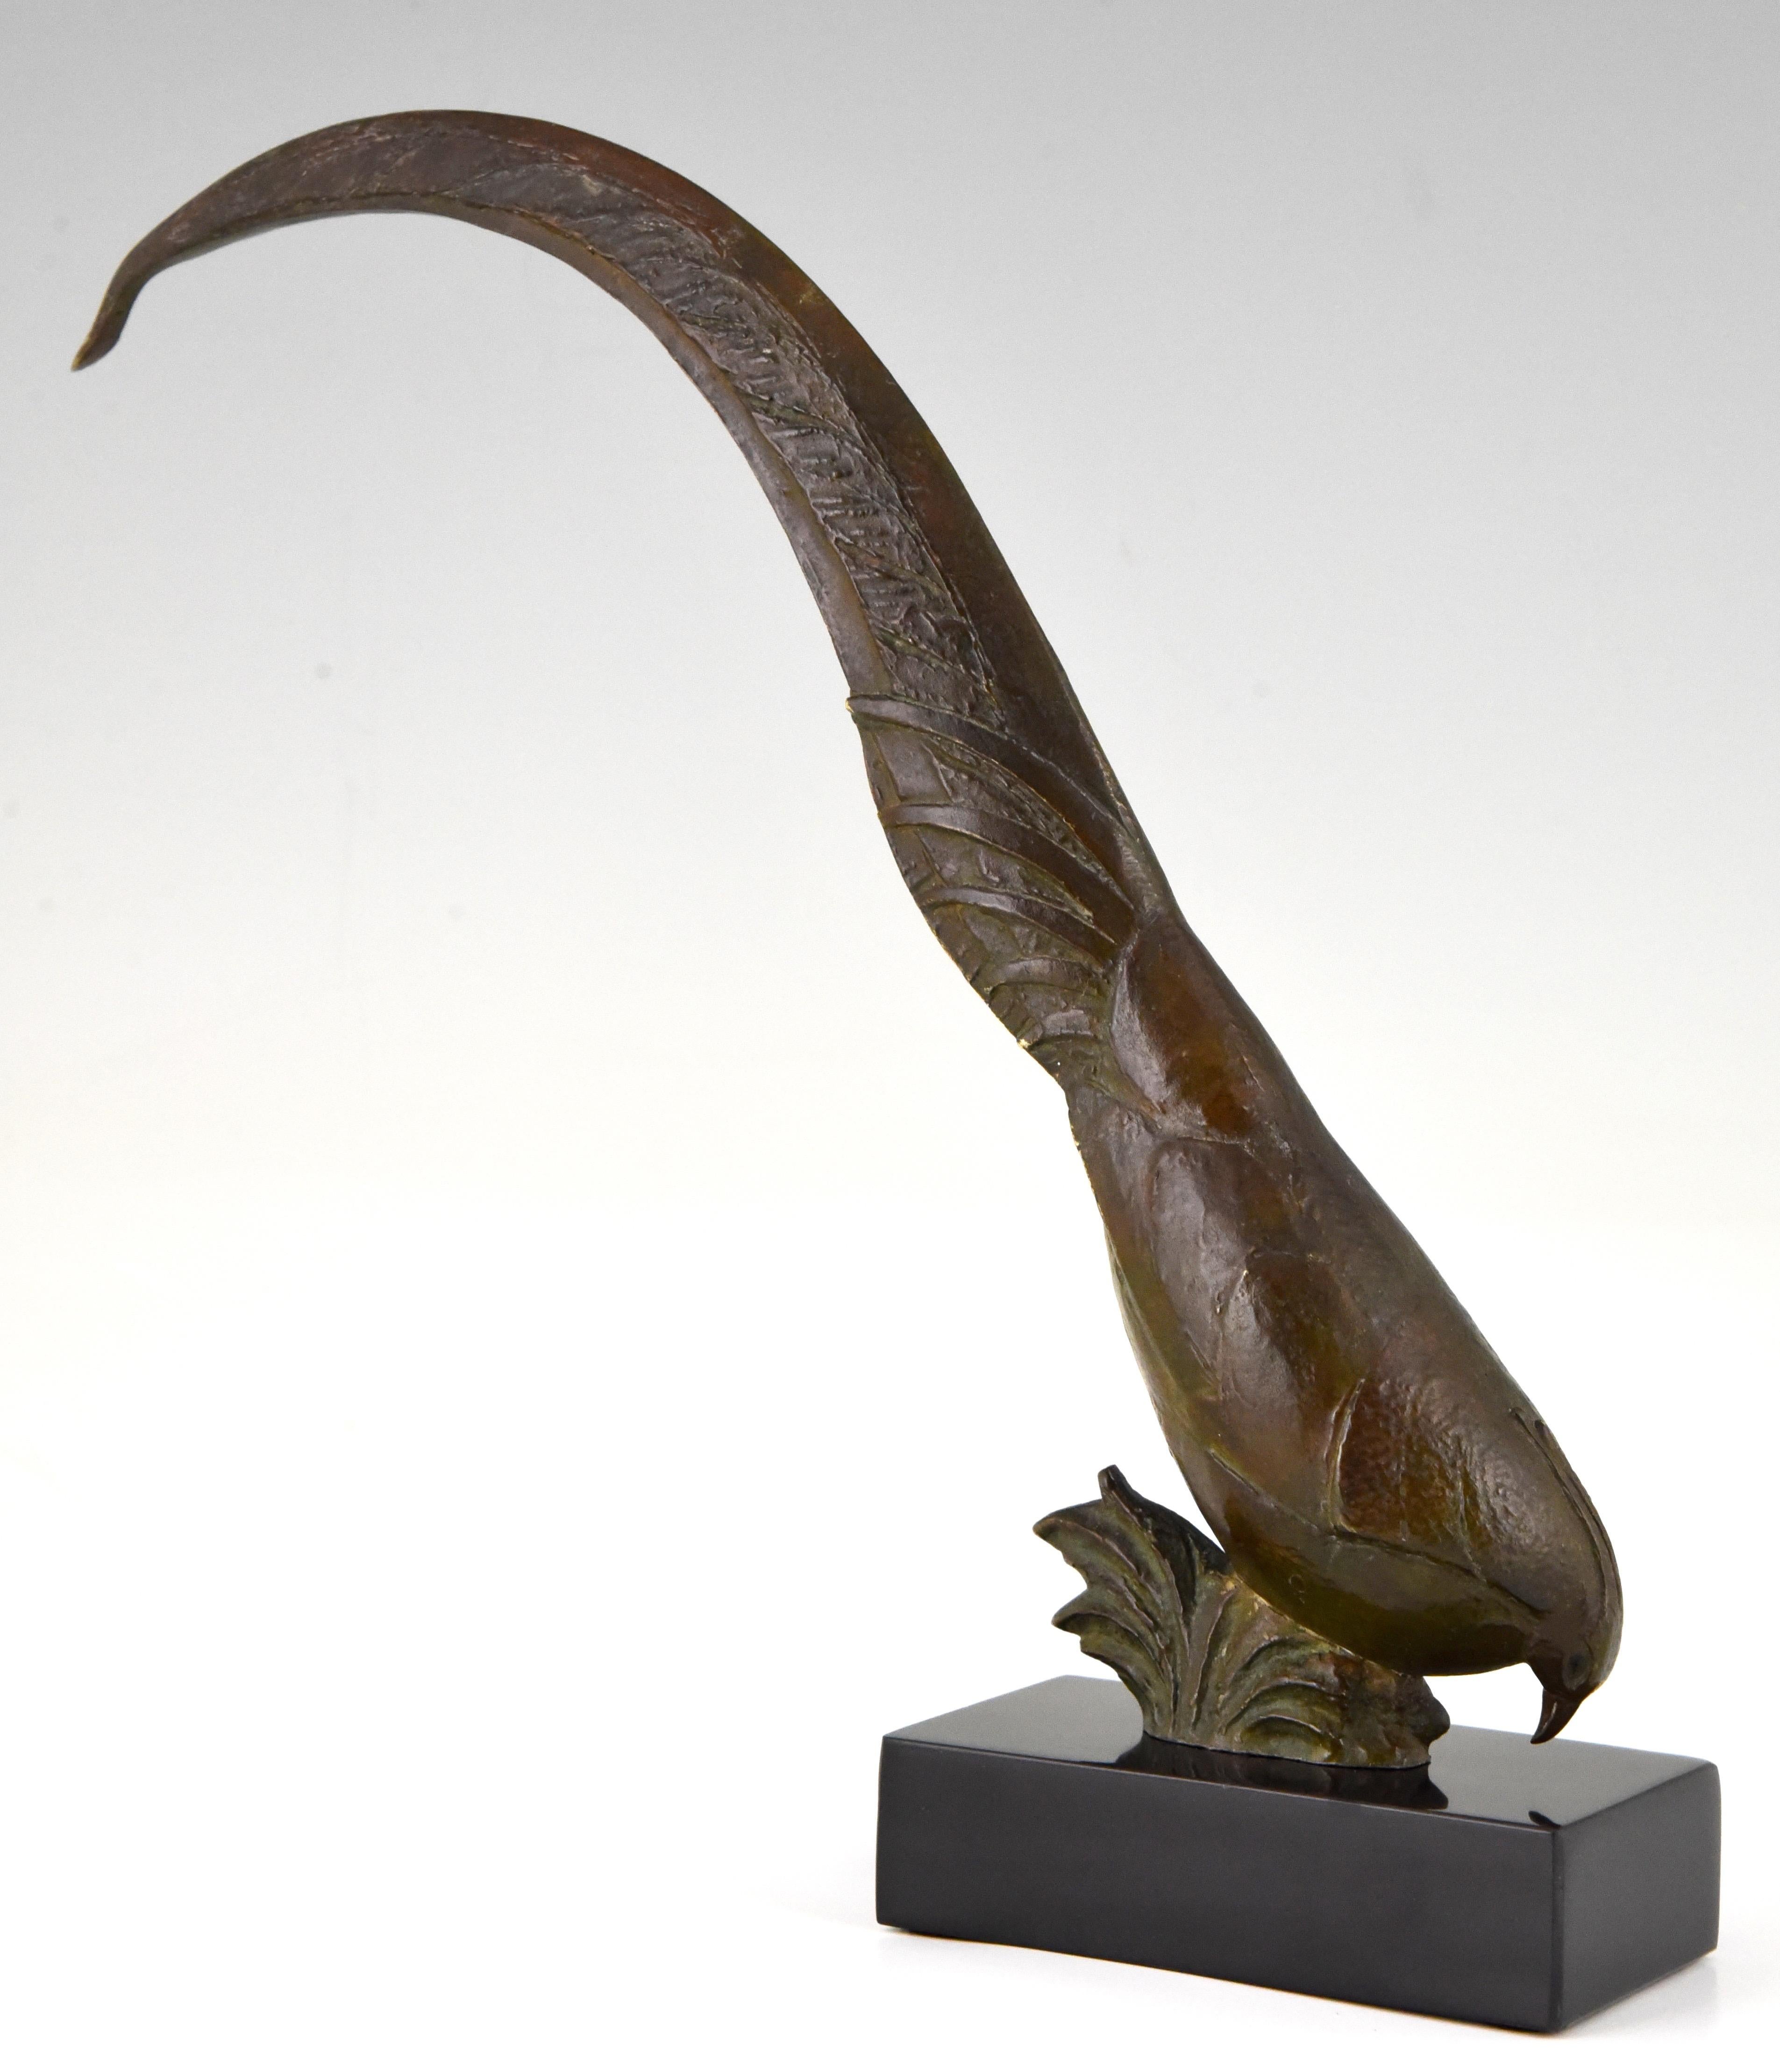 Art Deco bronze sculpture of a Golden Pheasant with long tail feathers by the French animal sculptor Andre Vincent Becquerel, beautiful patina and mounted on a Belgian Black marble base, circa 1925.

“Animals in bronze” by Christopher Payne.